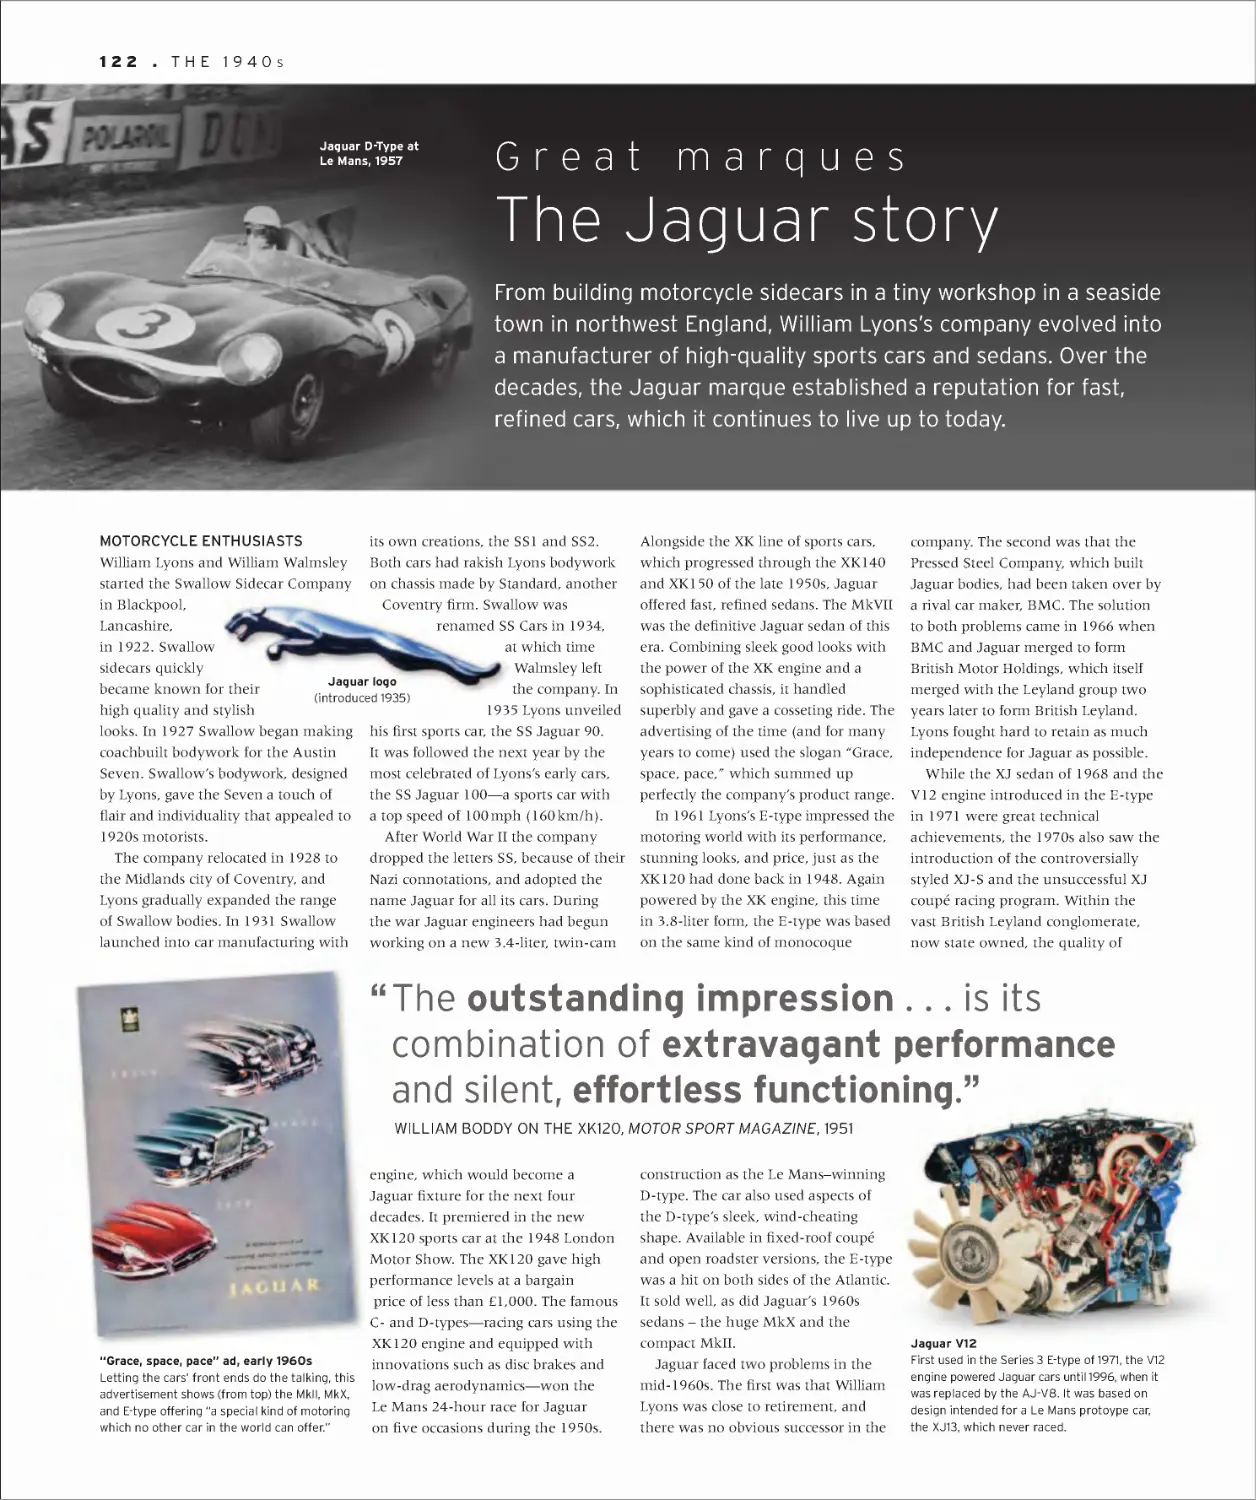 Great marques: The Jaguar story 122